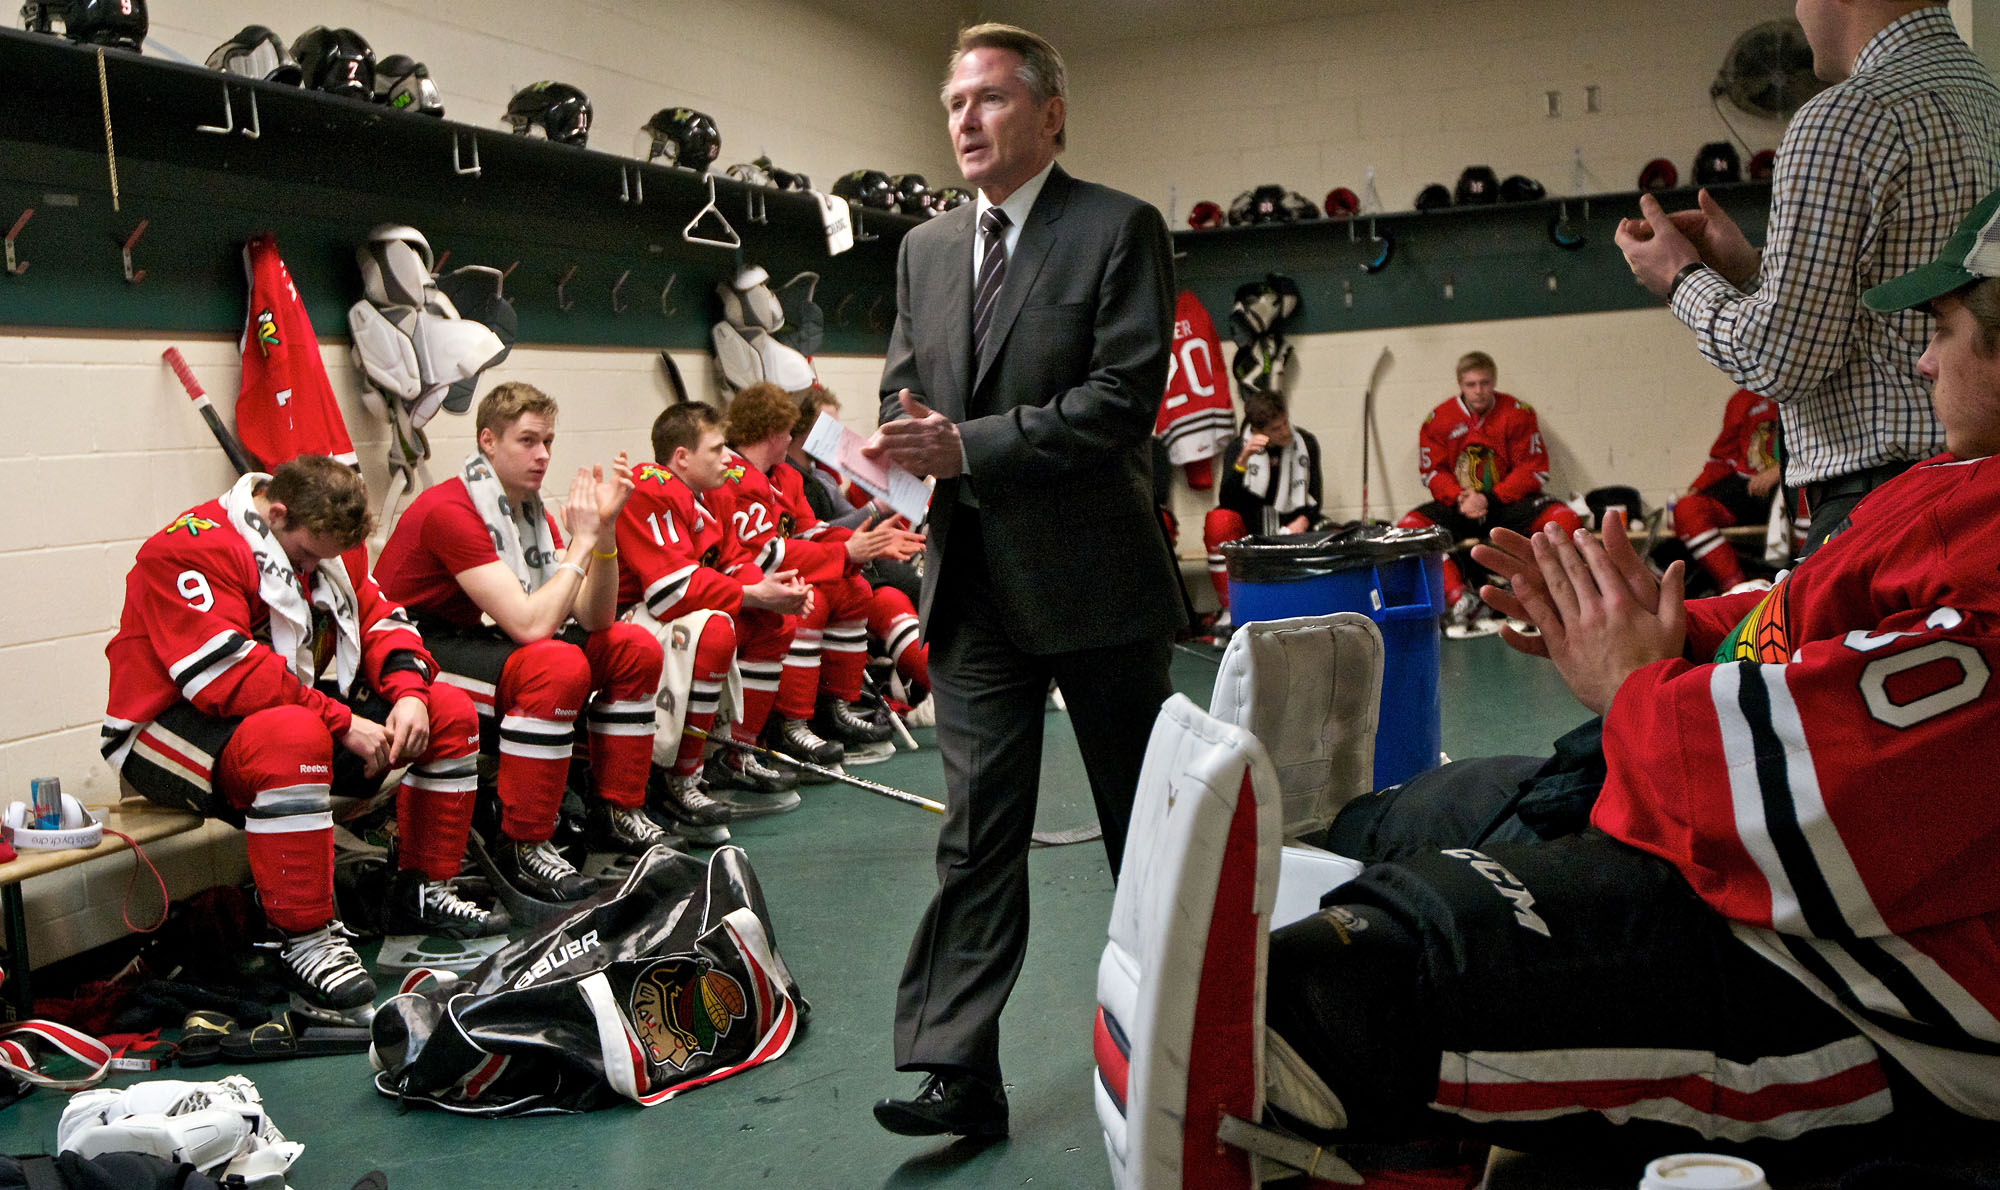 Head Coach Mike Johnston finishes a pre-game talk before his team takes the ice against Everett on Sunday January 26, 2014.